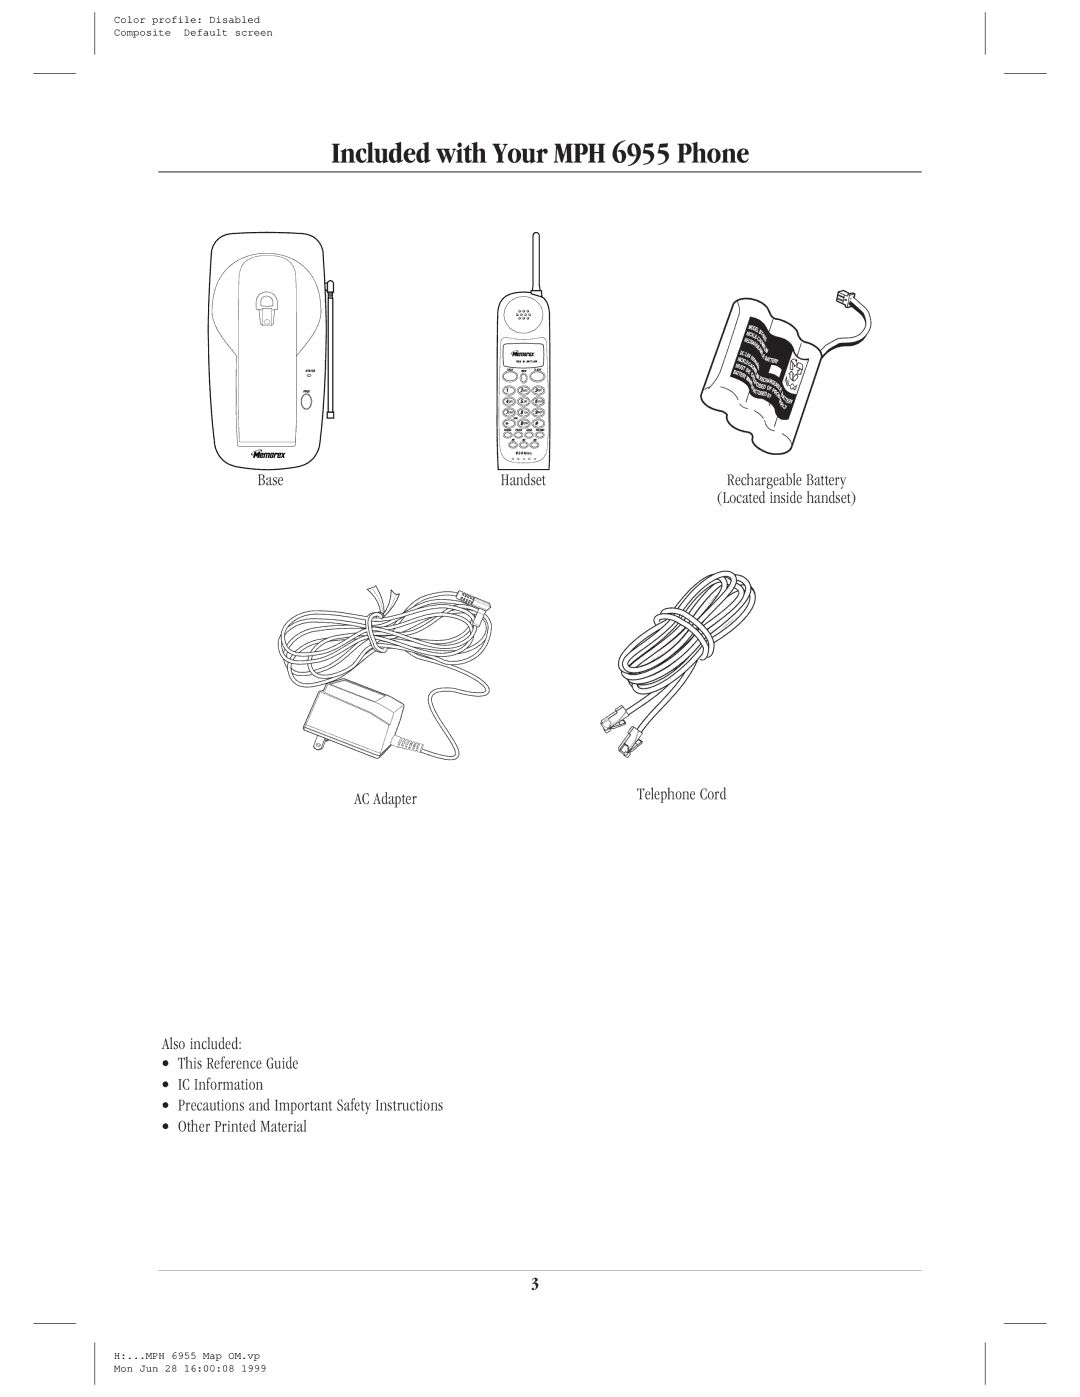 Memorex mph 6955 manual Included with Your MPH 6955 Phone, Base Handset, AC Adapter 